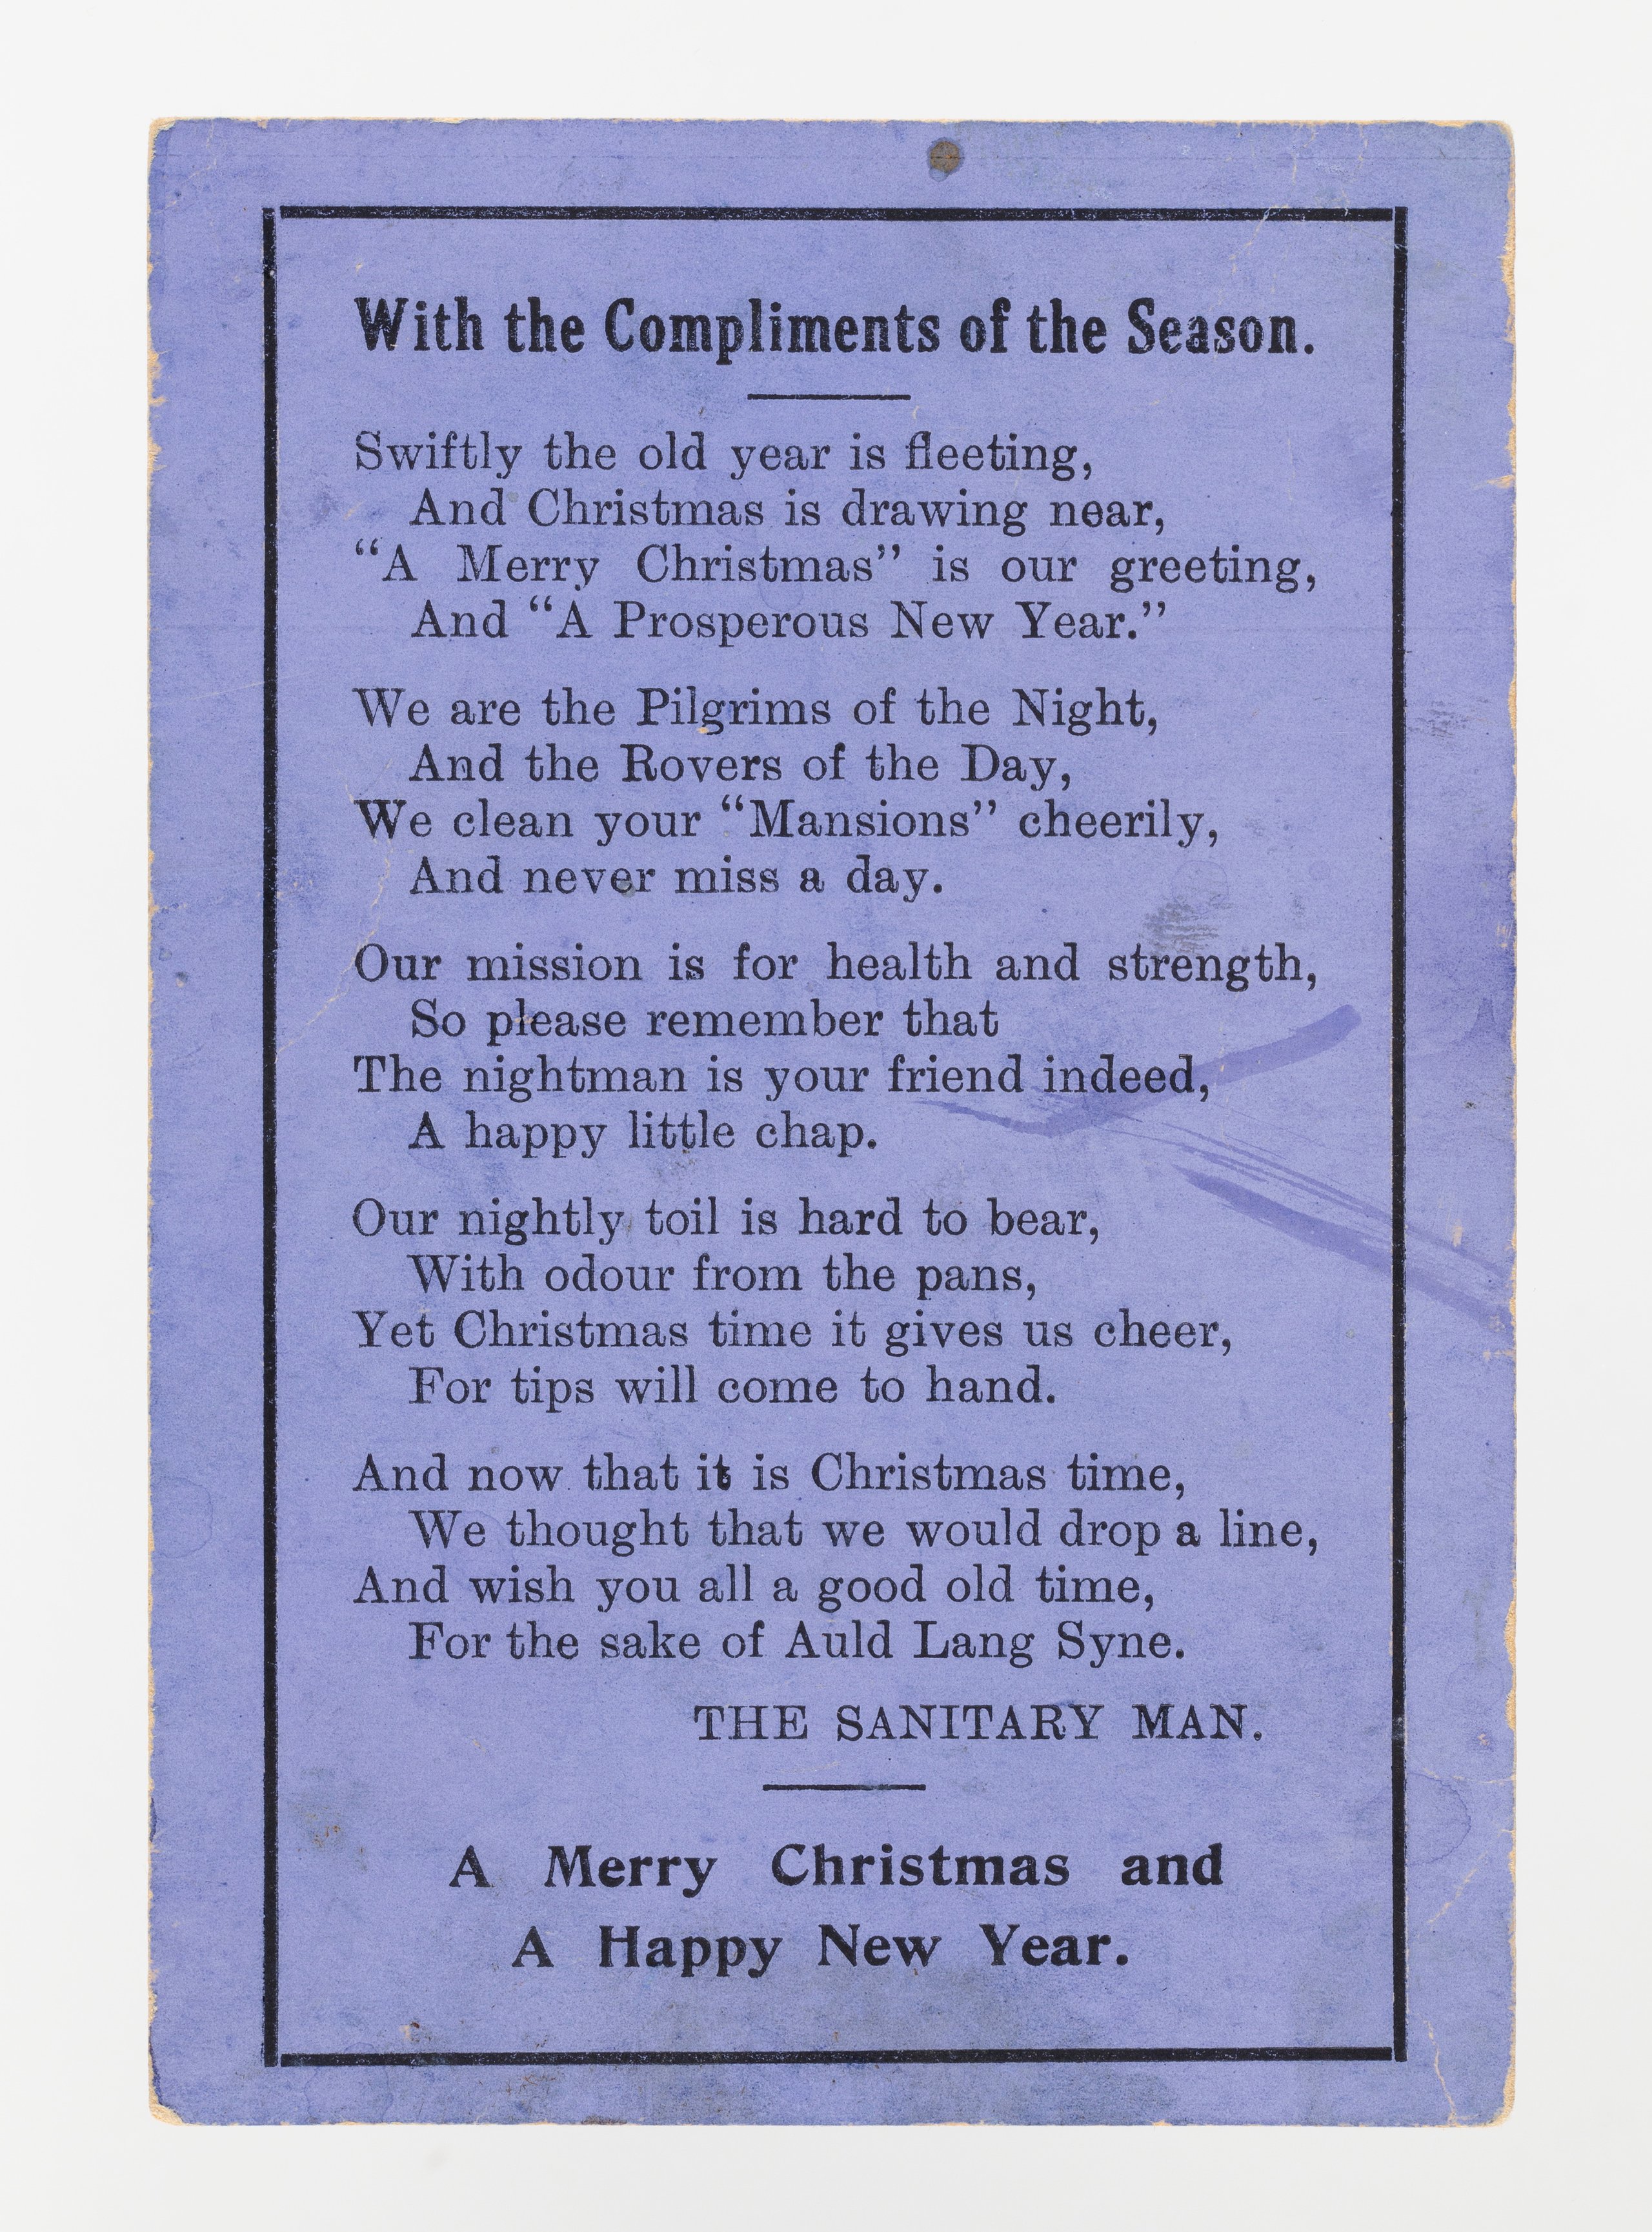 Christmas card from 'The Sanitary Man'